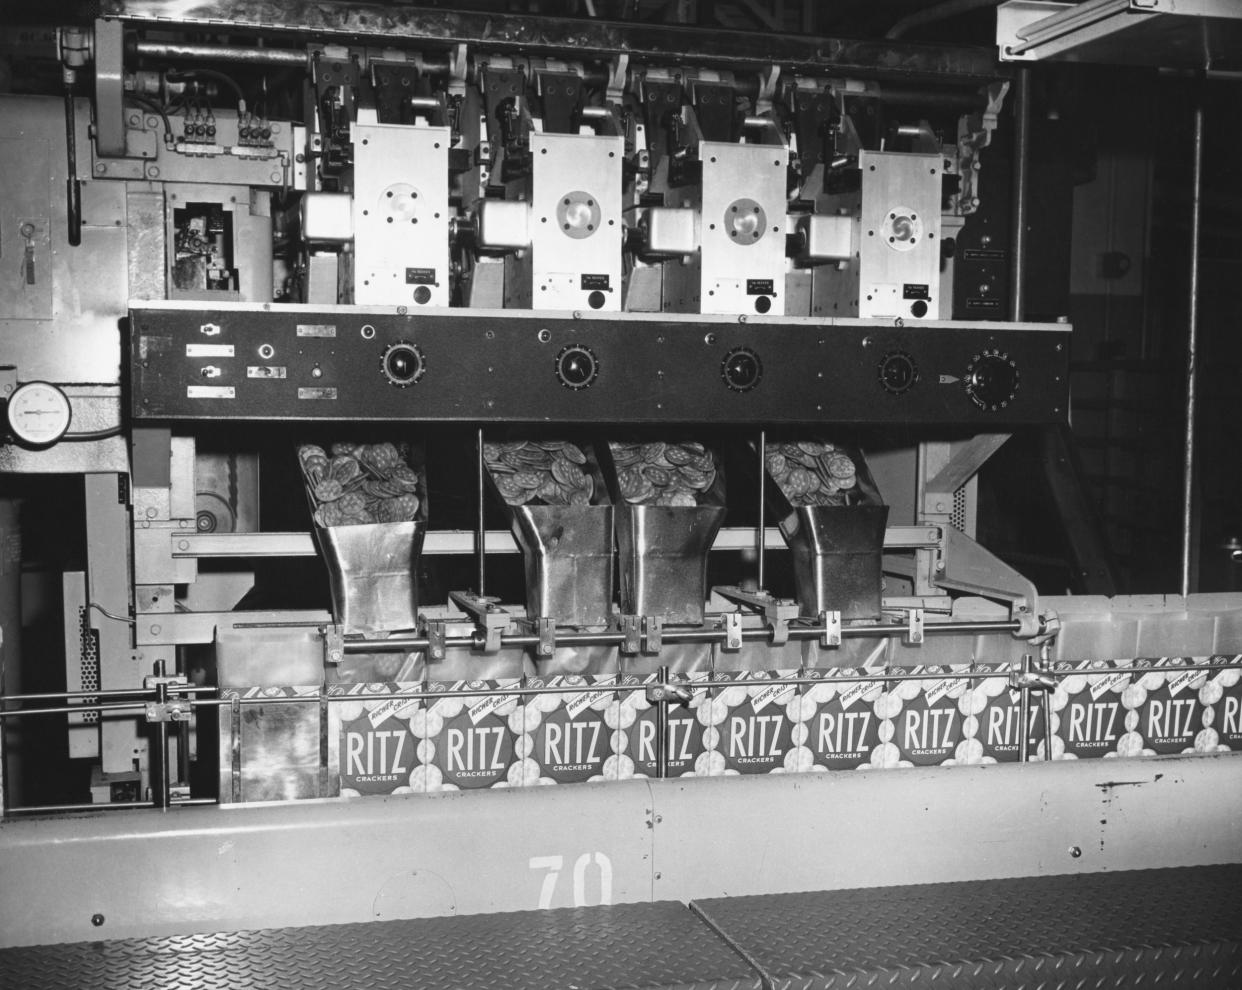 Machinery at a Ritz Cracker packing facility, with crackers pouring into a hopper which is then dispensed into each carton, U.S., vintage black and white image, circa 1950